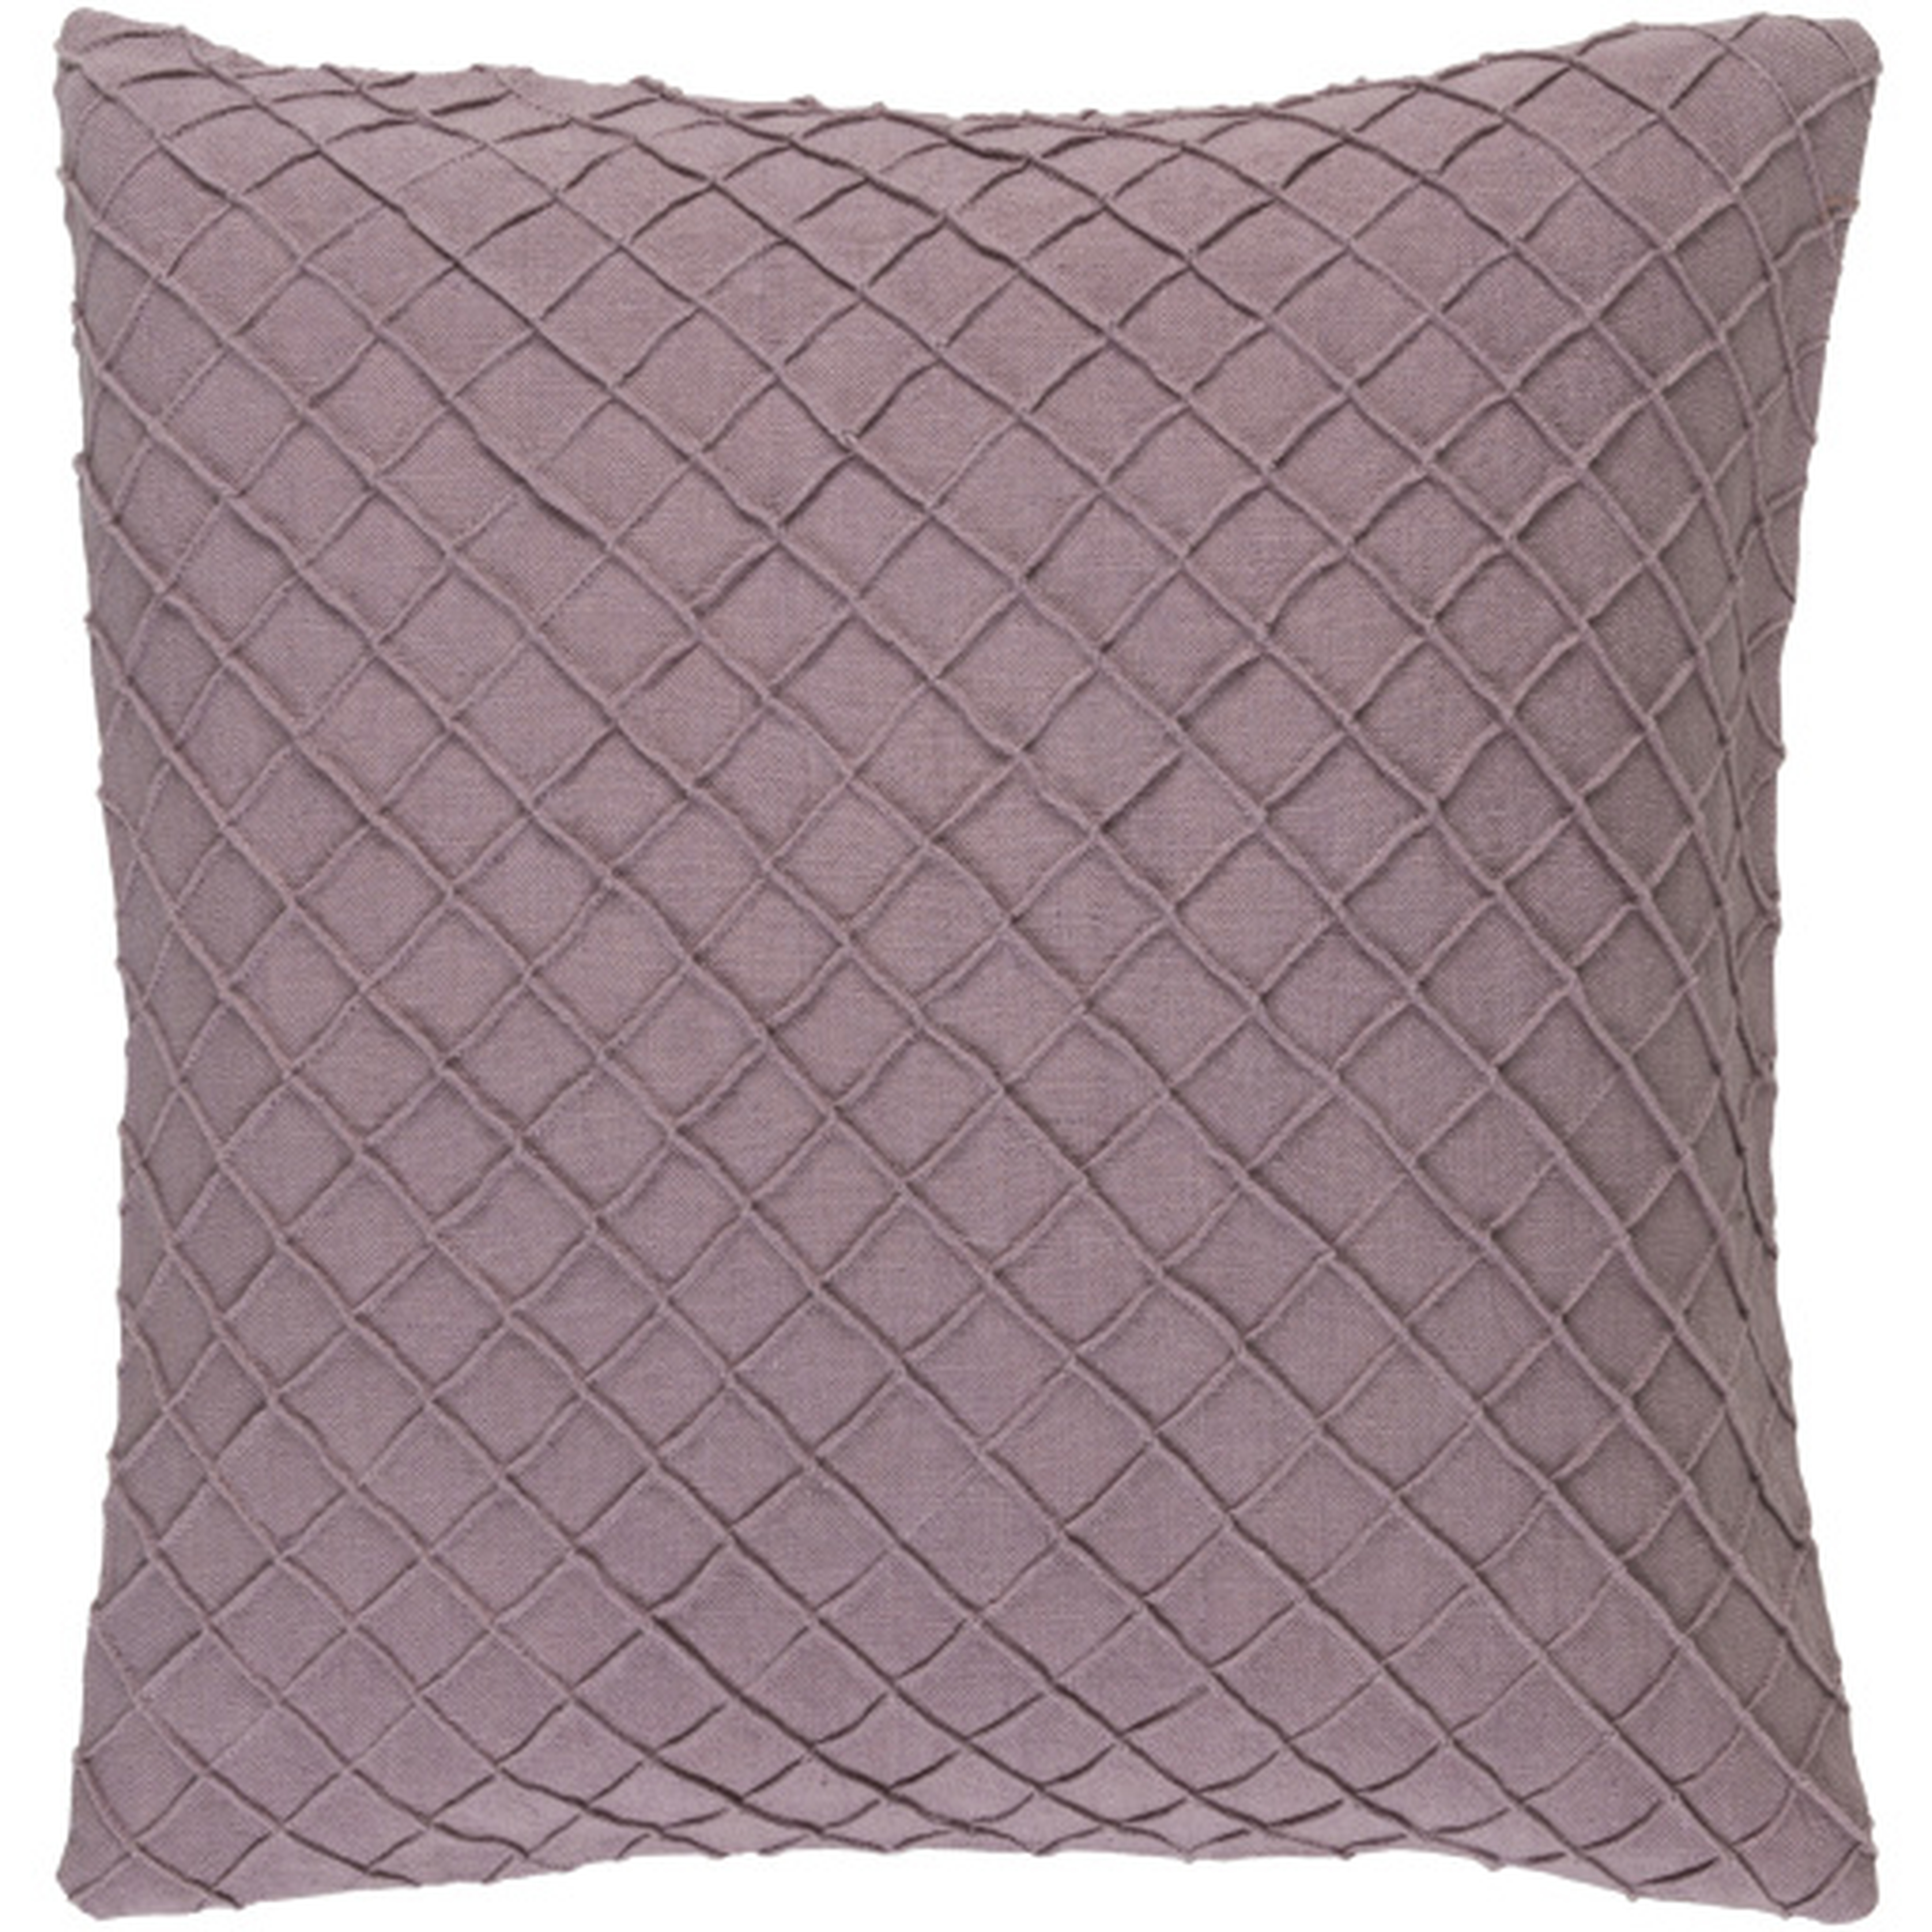 Wright Throw Pillow, 18" x 18", with down insert - Surya